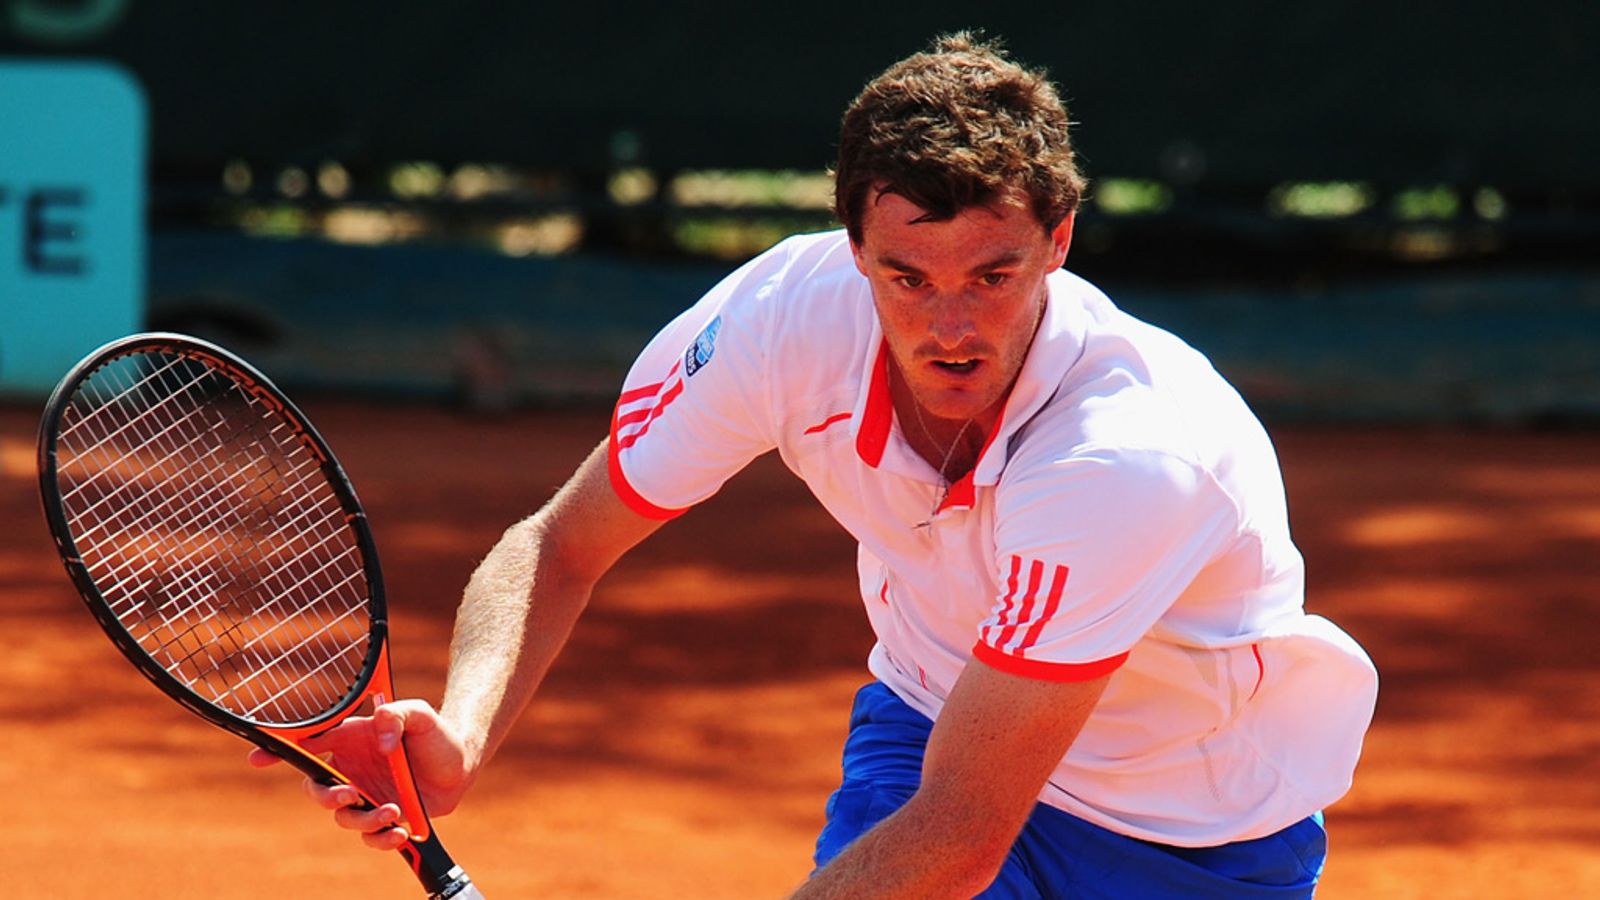 US Clay Court Championships Jamie Murray and John Peers win doubles